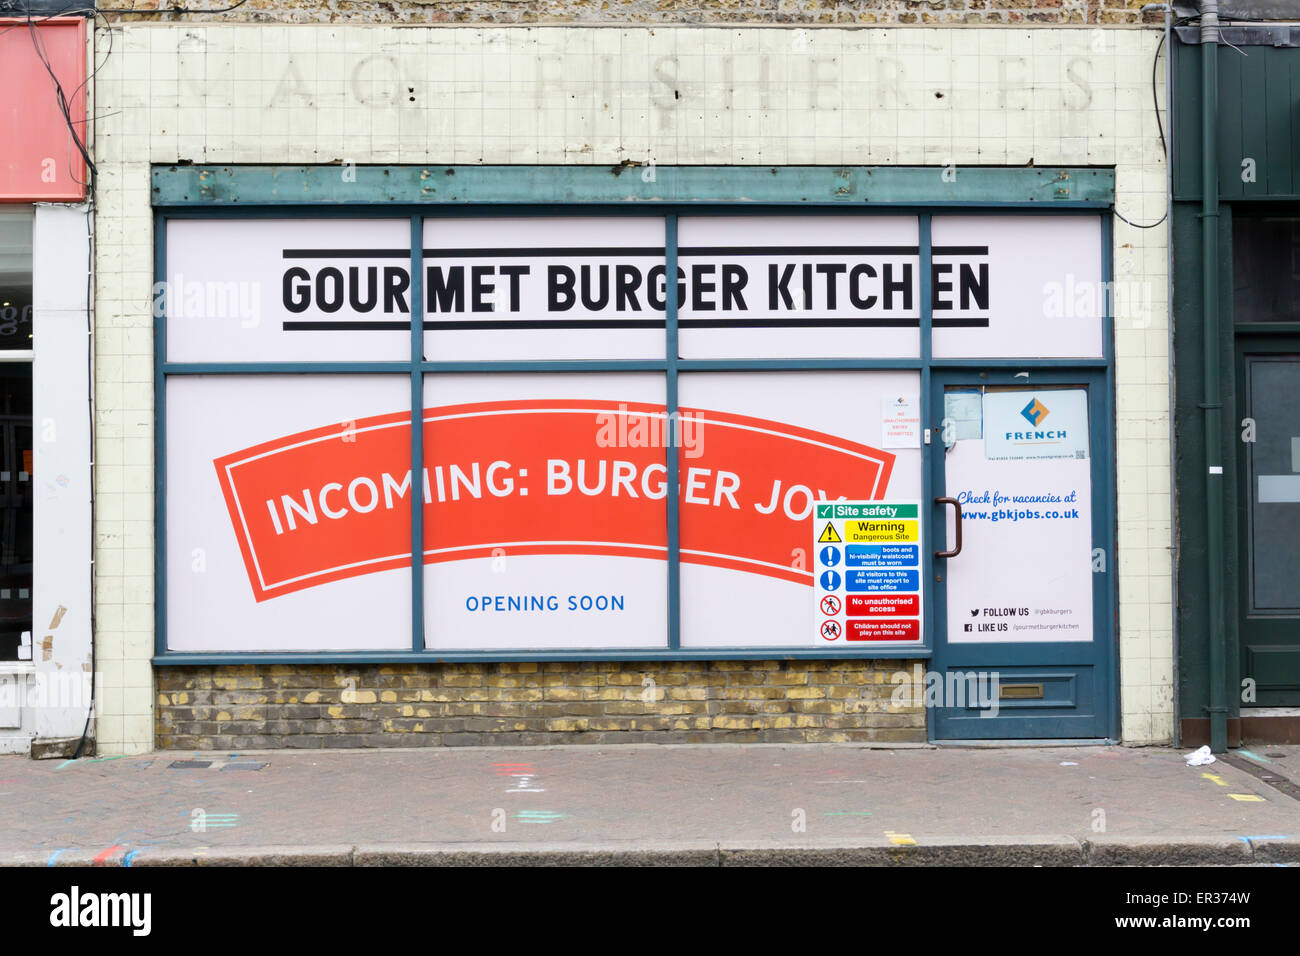 Gourmet Burger Kitchen soon to open in Bromley, in shop once occupied by Mac Fisheries. Stock Photo